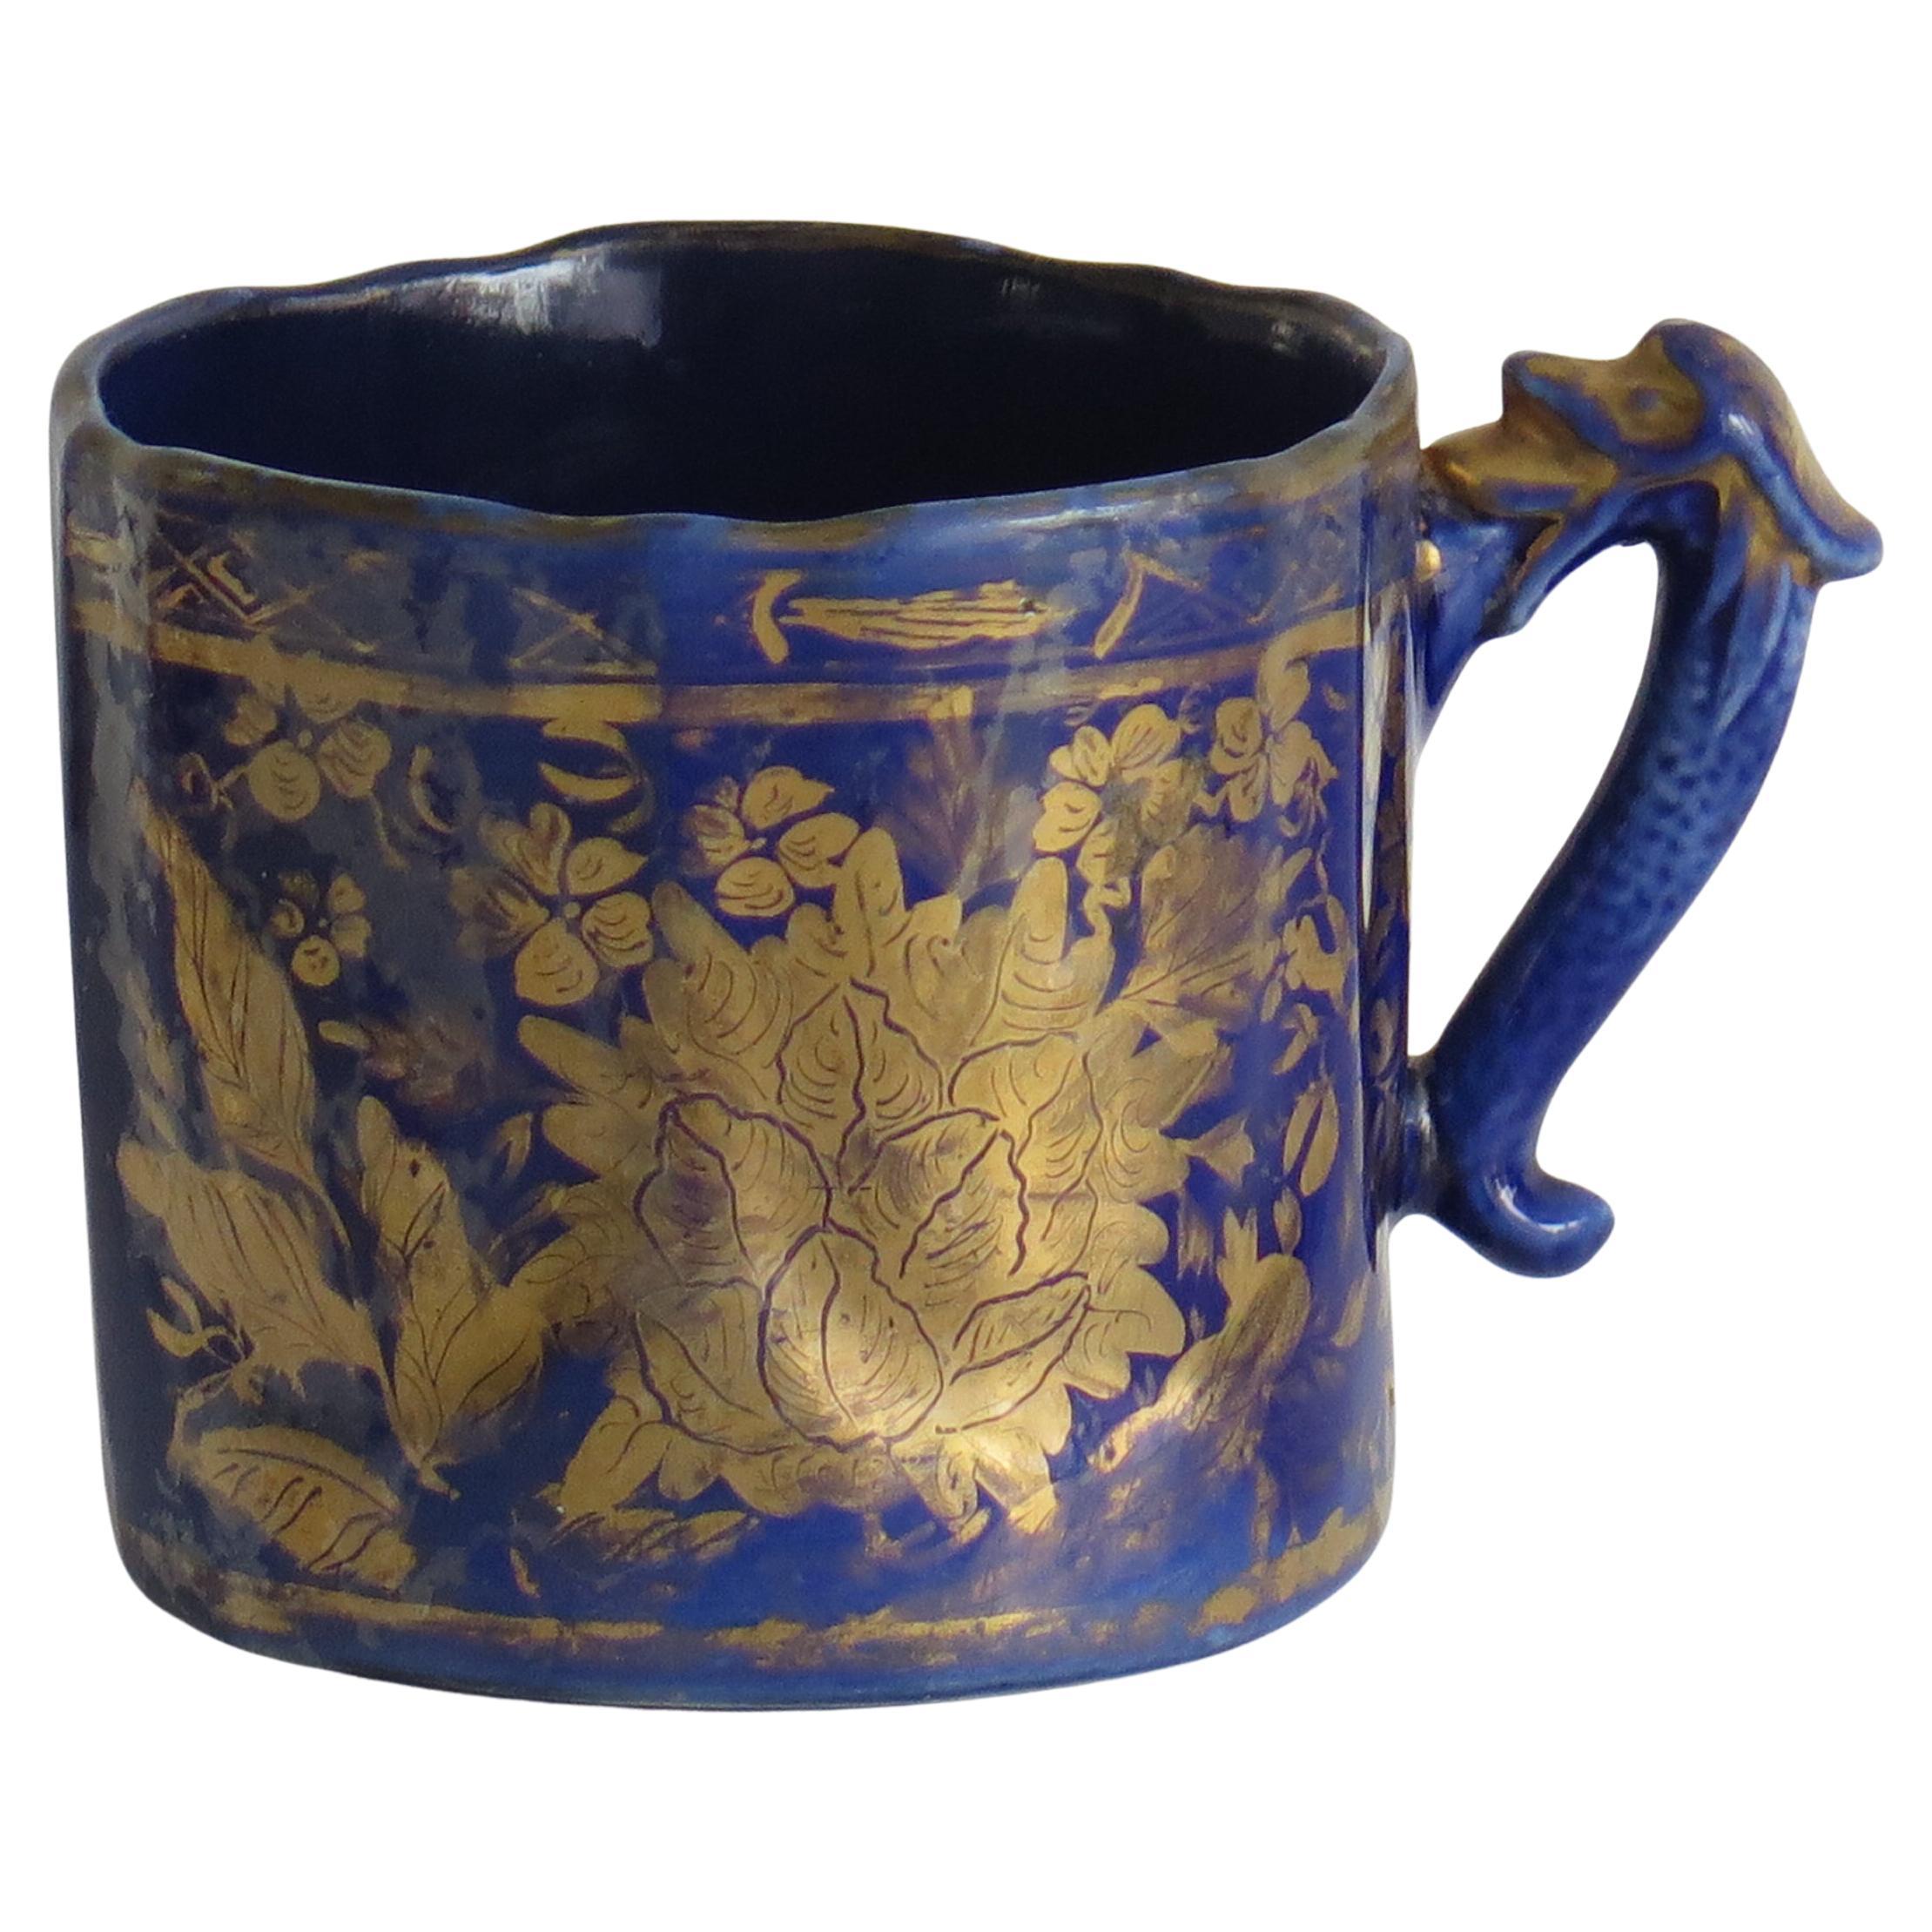 This is a rare, Ironstone pottery mug in the Gold Posies and Butterflies pattern, made by Mason's Ironstone, of Lane Delph, Staffordshire, England, circa 1818

Early Mason's ironstone mugs are rare. This mug has a vertically fluted shape, a